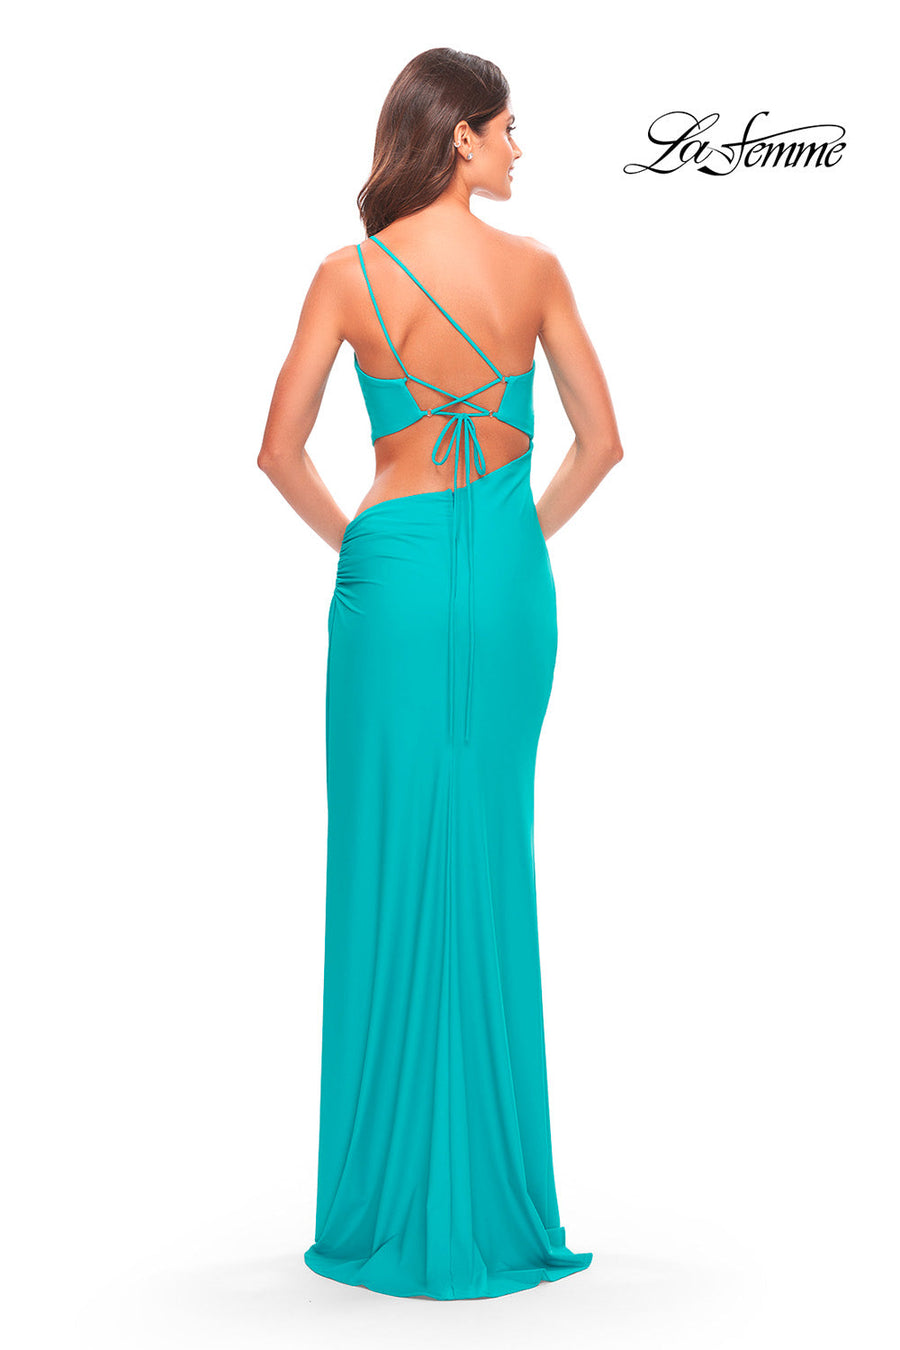 La Femme 31443 prom dress images.  La Femme 31443 is available in these colors: Aqua, Hot Coral, Neon Pink.